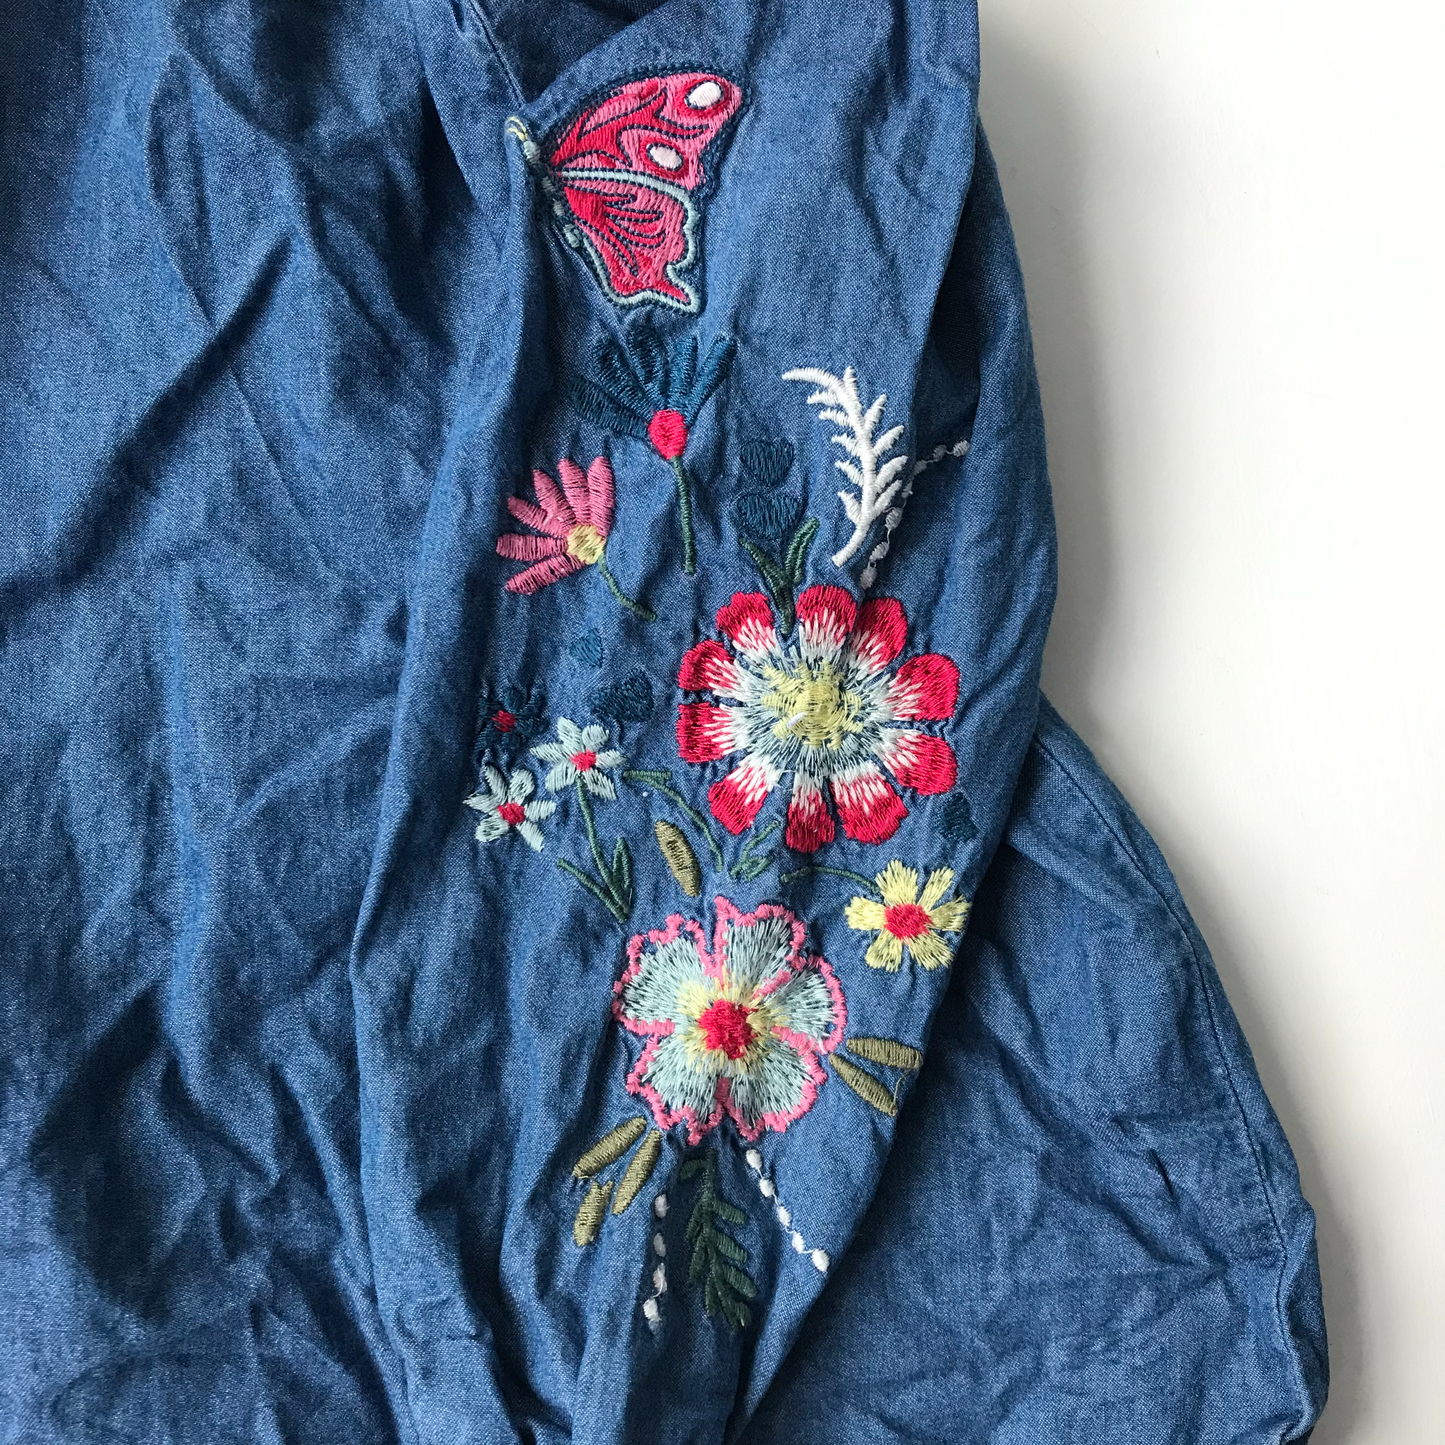 Blouse - Denim Style with Embroidery - Age 5